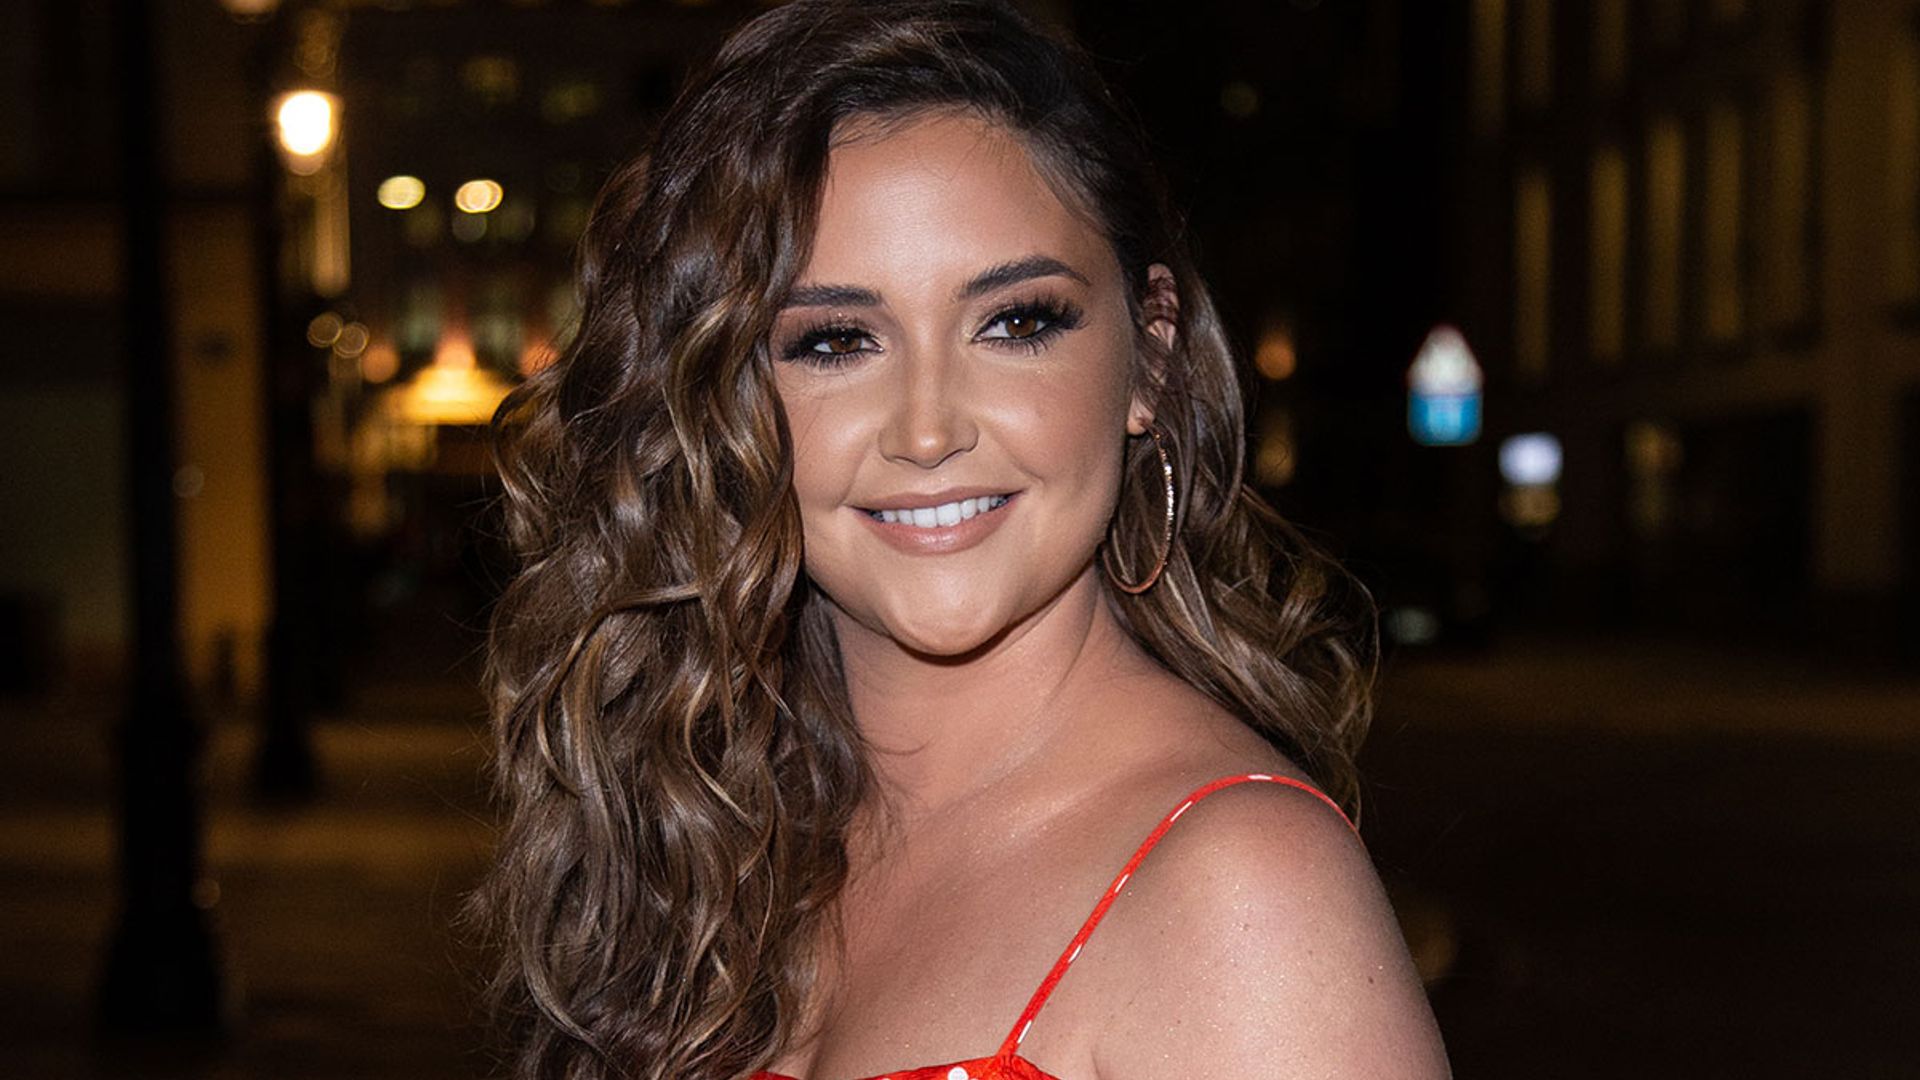 Jacqueline Jossa mutes comments on throwback picture as fans discuss 'thin' figure